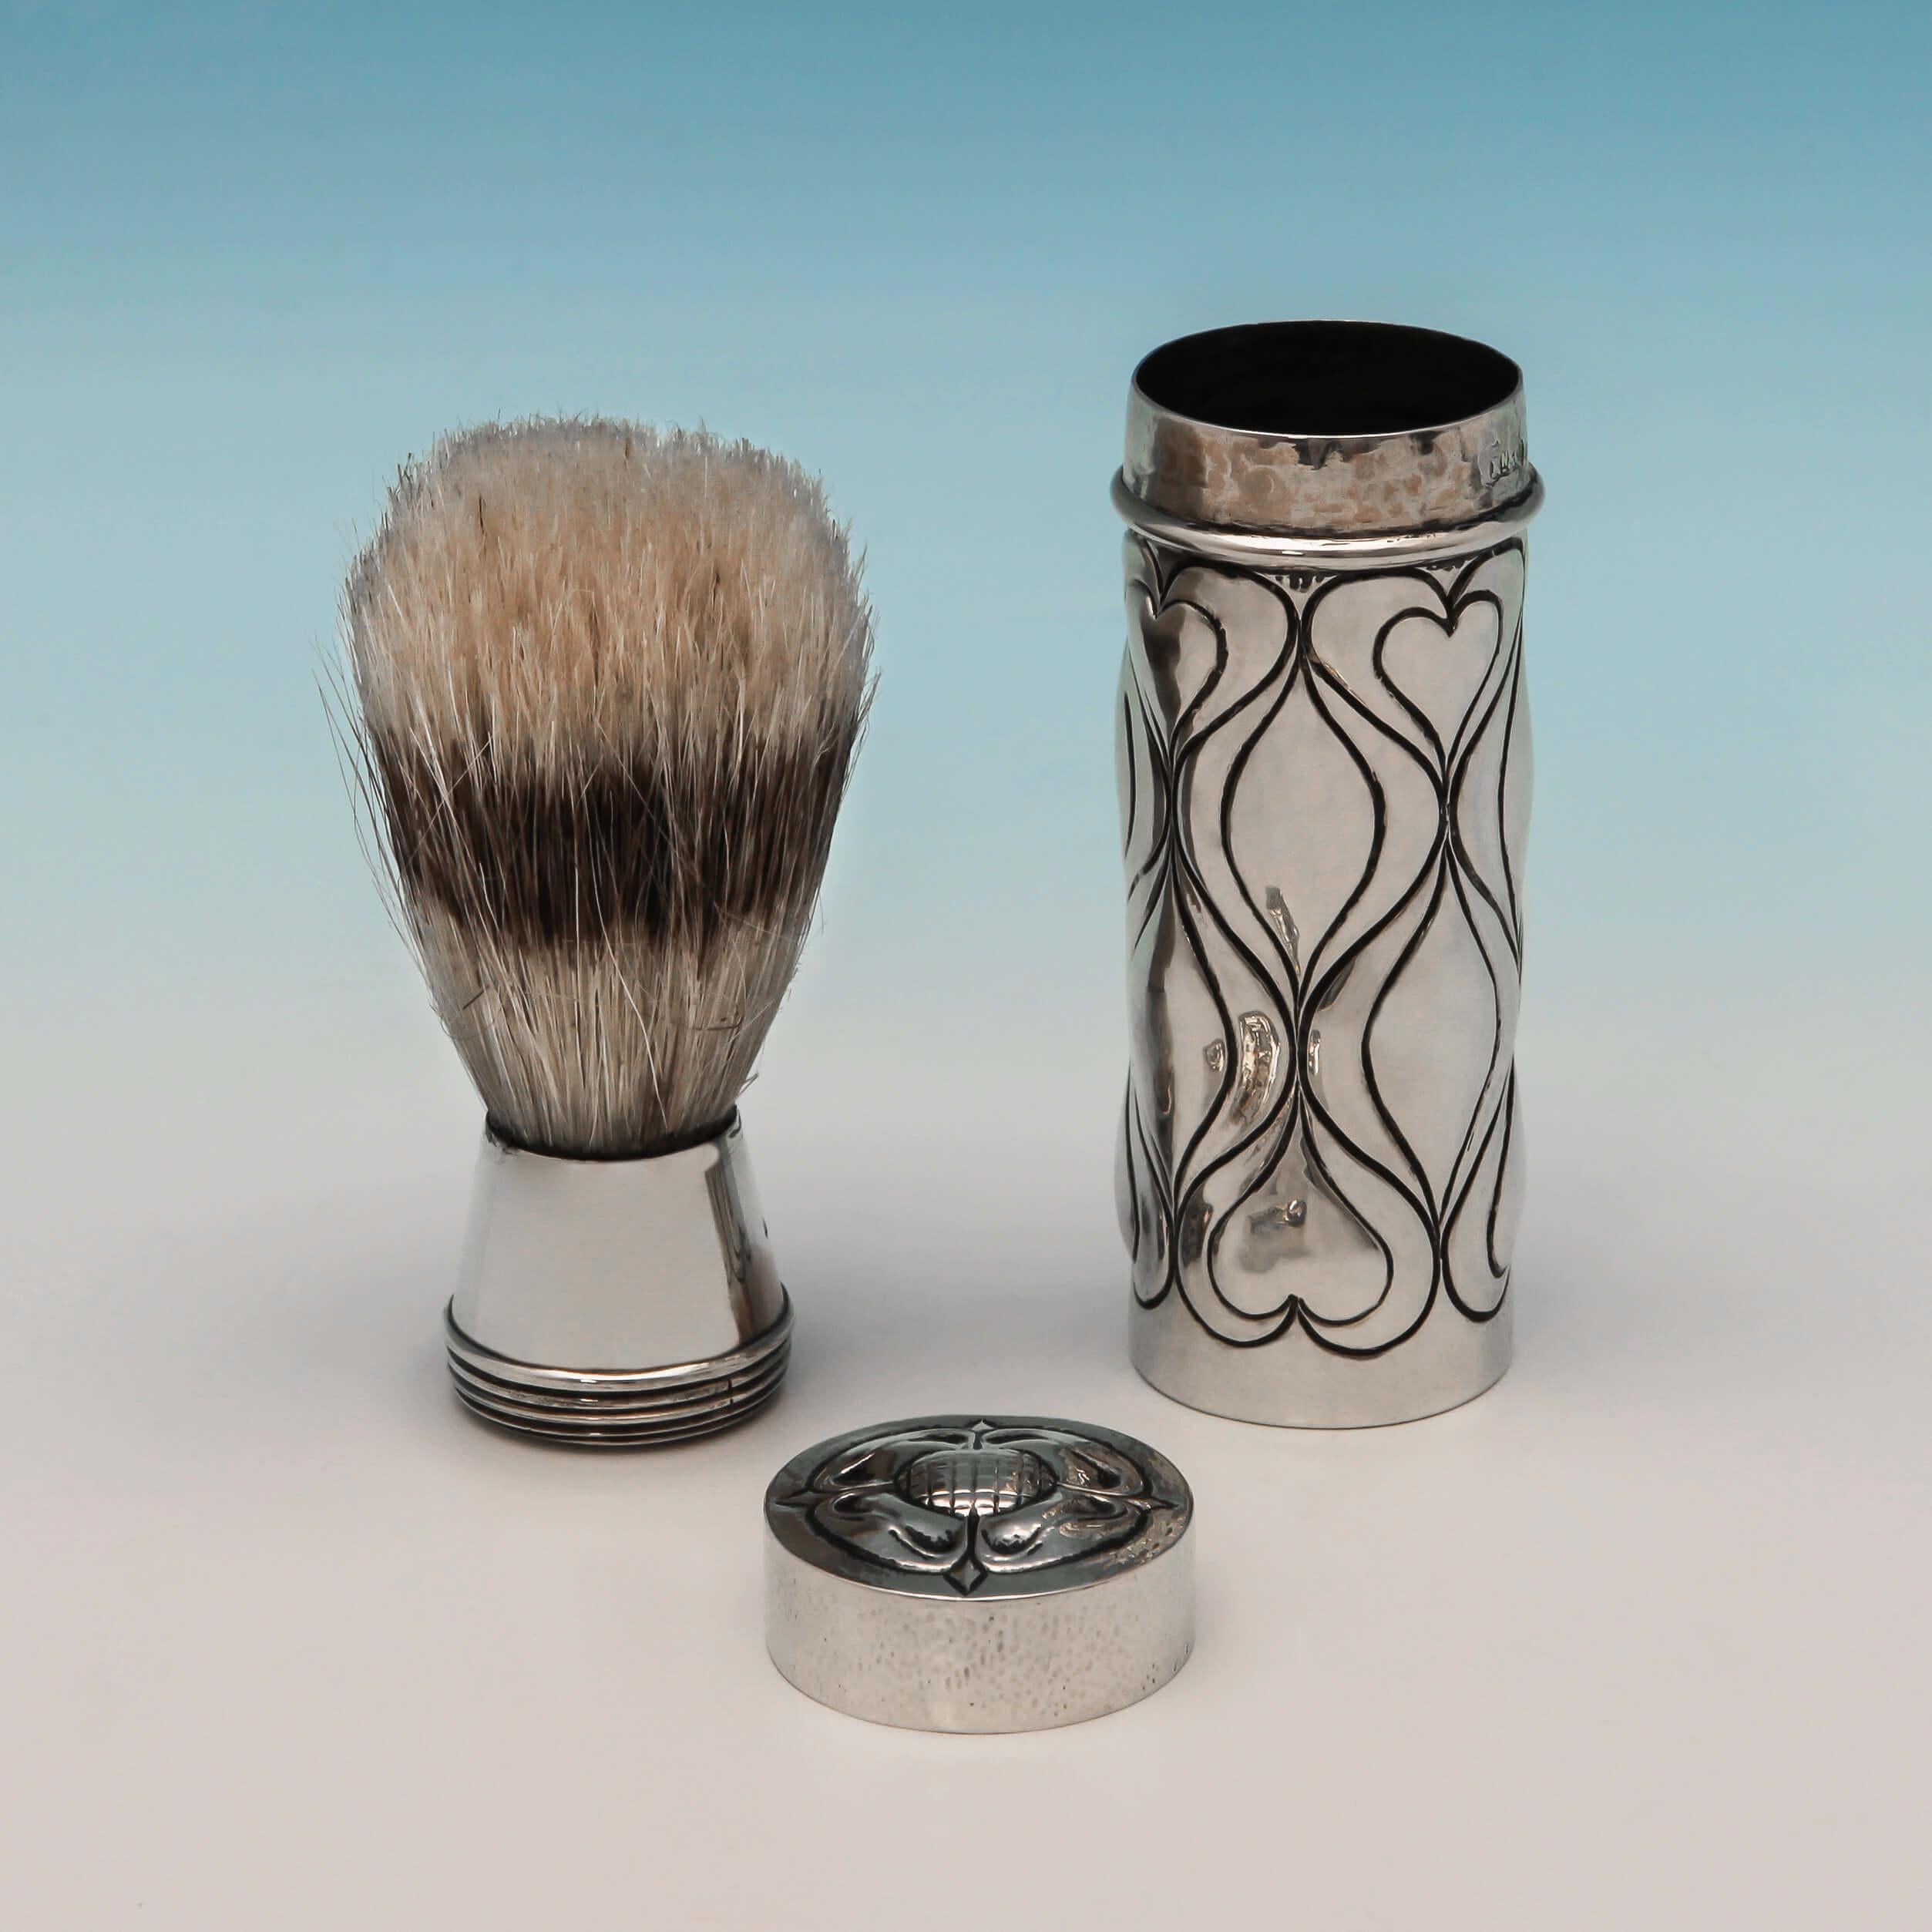 Hallmarked in London in 1900 by Ramsden & Carr, this stylish and rare, sterling silver shaving brush, is in the Arts & Crafts style, with chased decoration to the body, a hand hammered finish, and a badger hair brush. This shaving brush measures